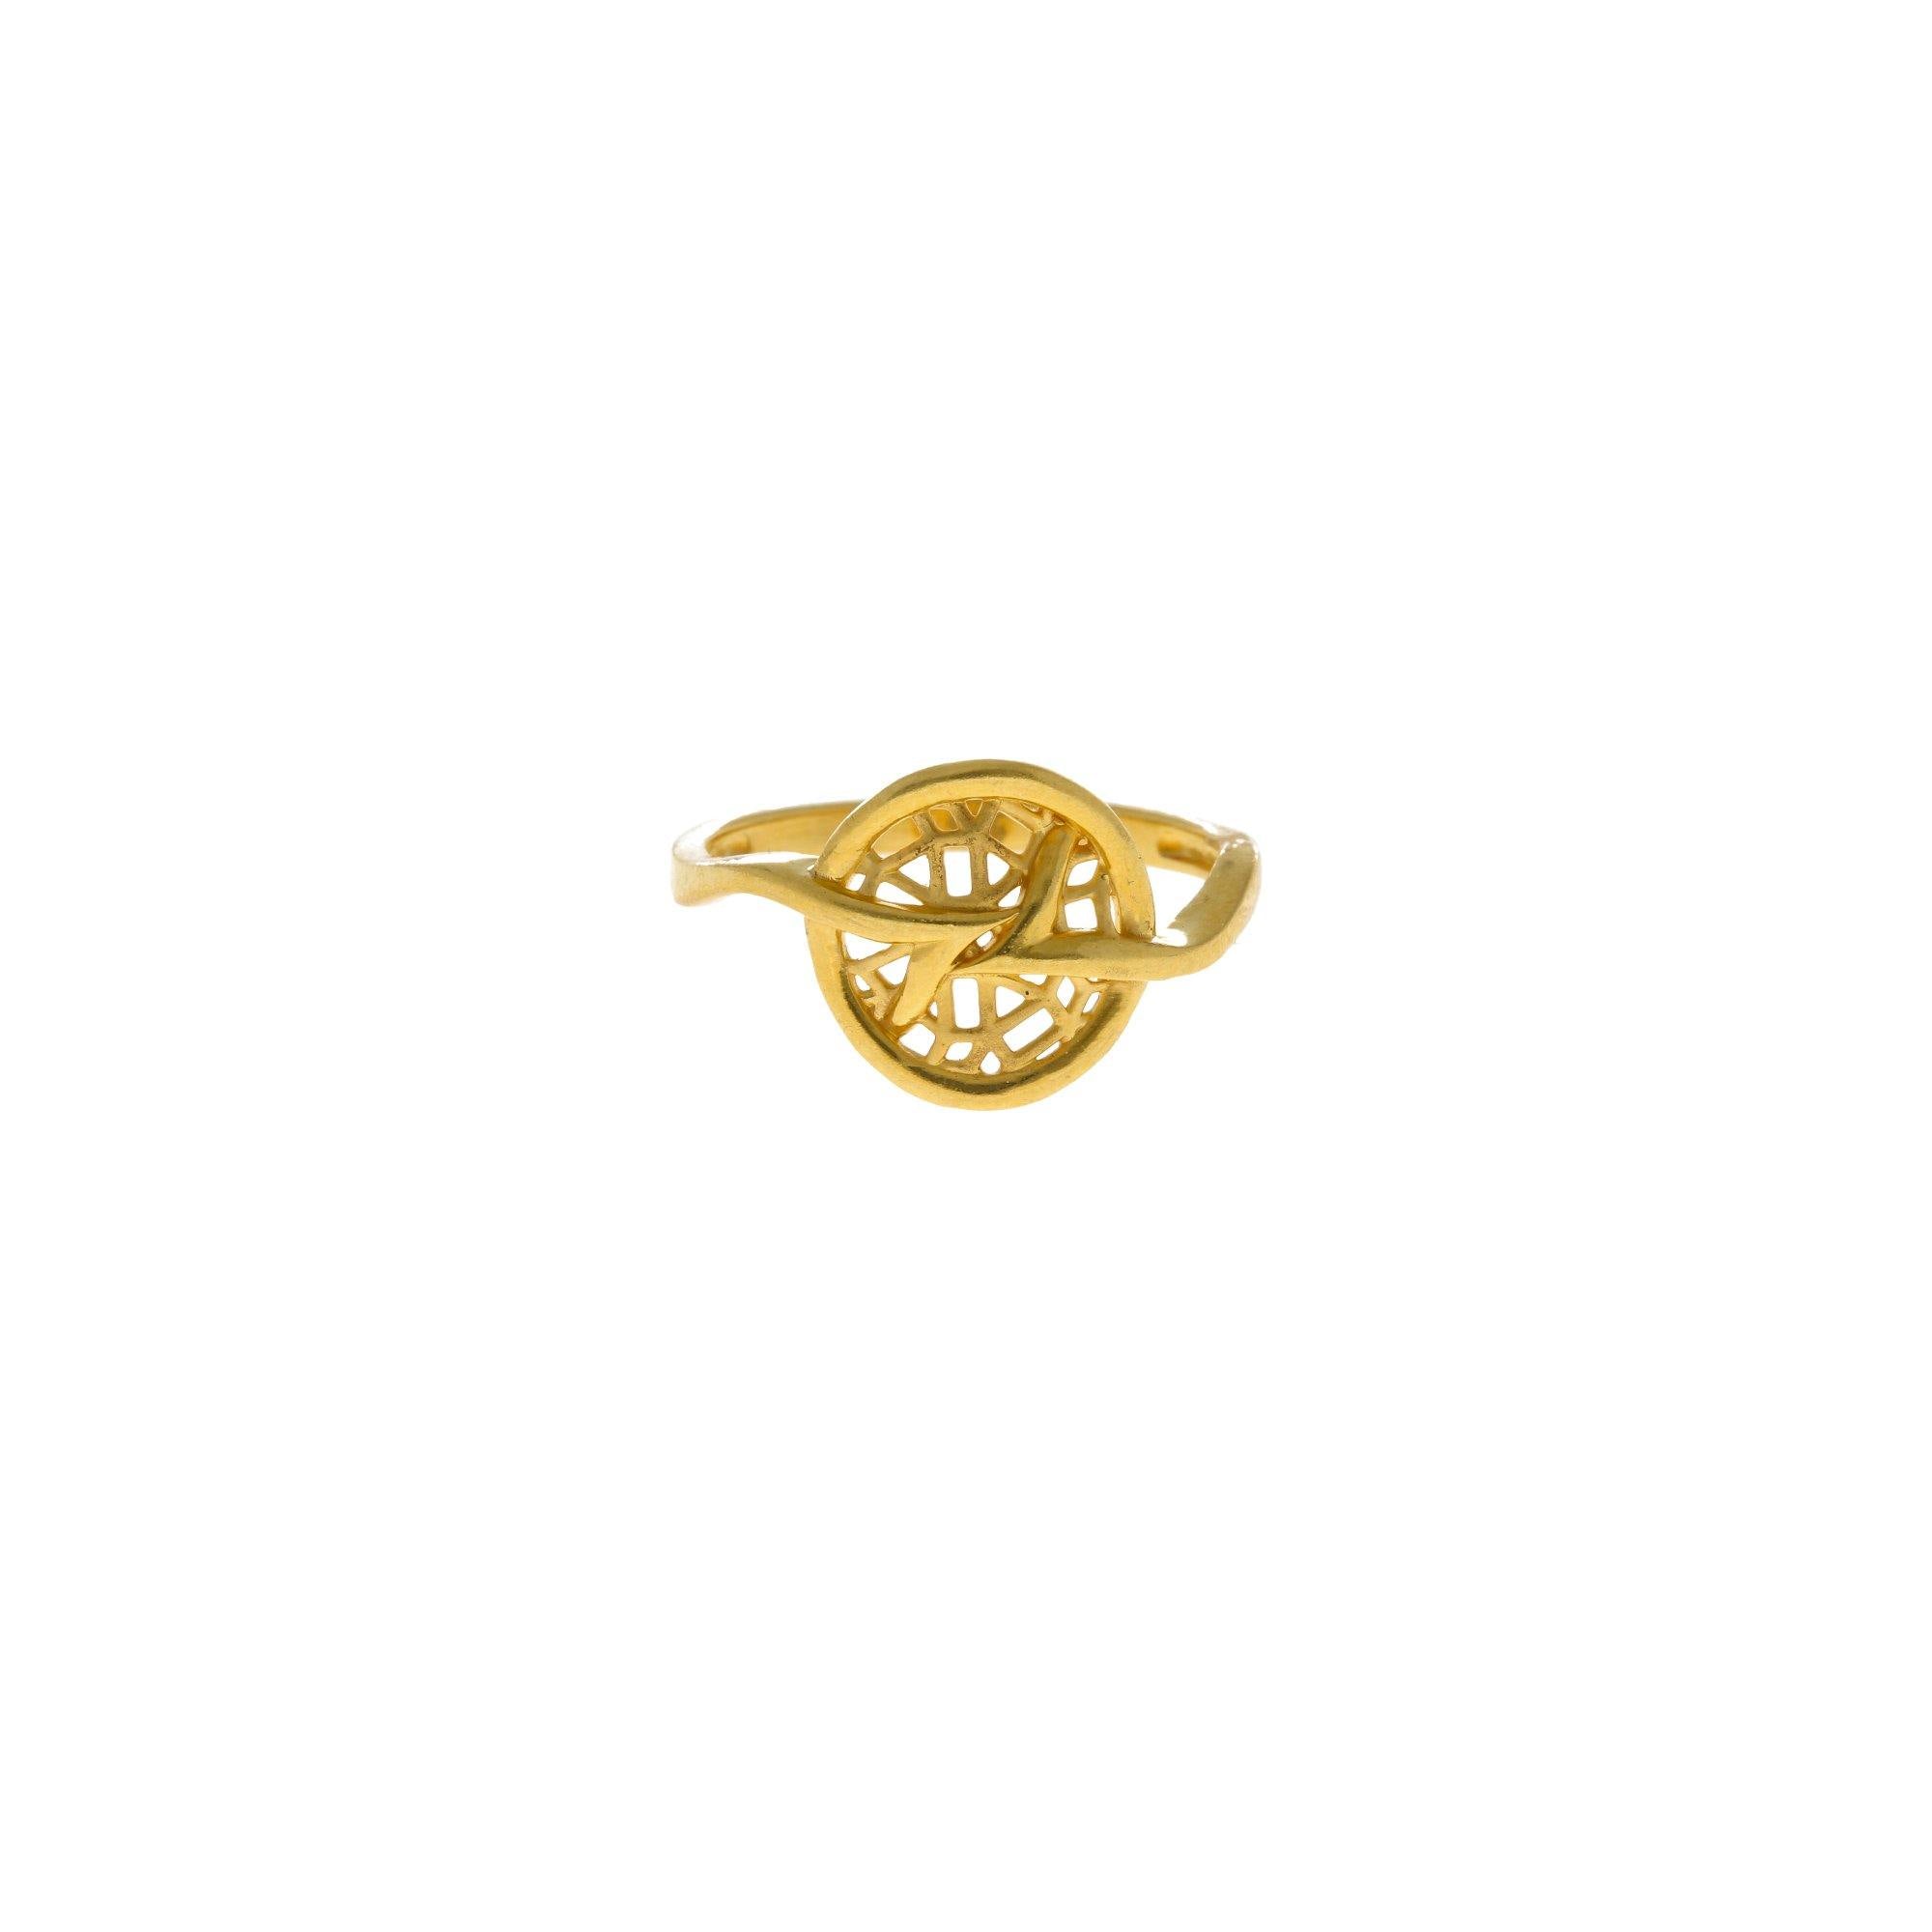 Buy Round Gold Polished Lotus Shape Ring/flower Design Indian Style Gold  Plated Ring/kundan Stone Ring With Gold Online in India - Etsy